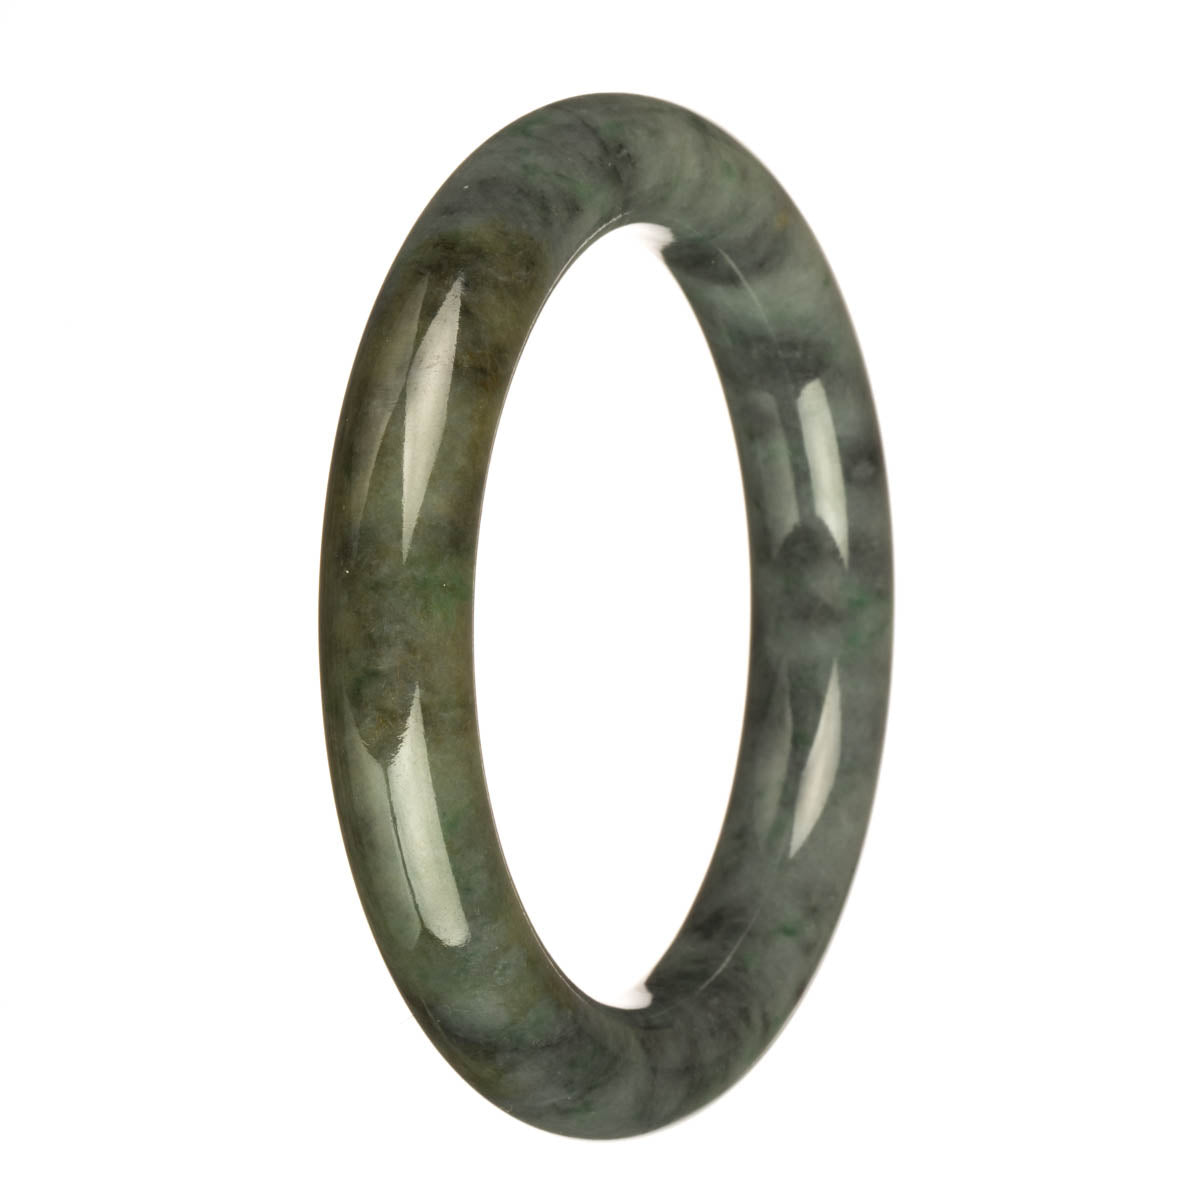 A jade bangle with a grey base color, featuring apple green, brown, and grey patterns. A stunning Burma Jade bangle showcasing a mix of vibrant apple green, brown, and grey patterns on a grey base.